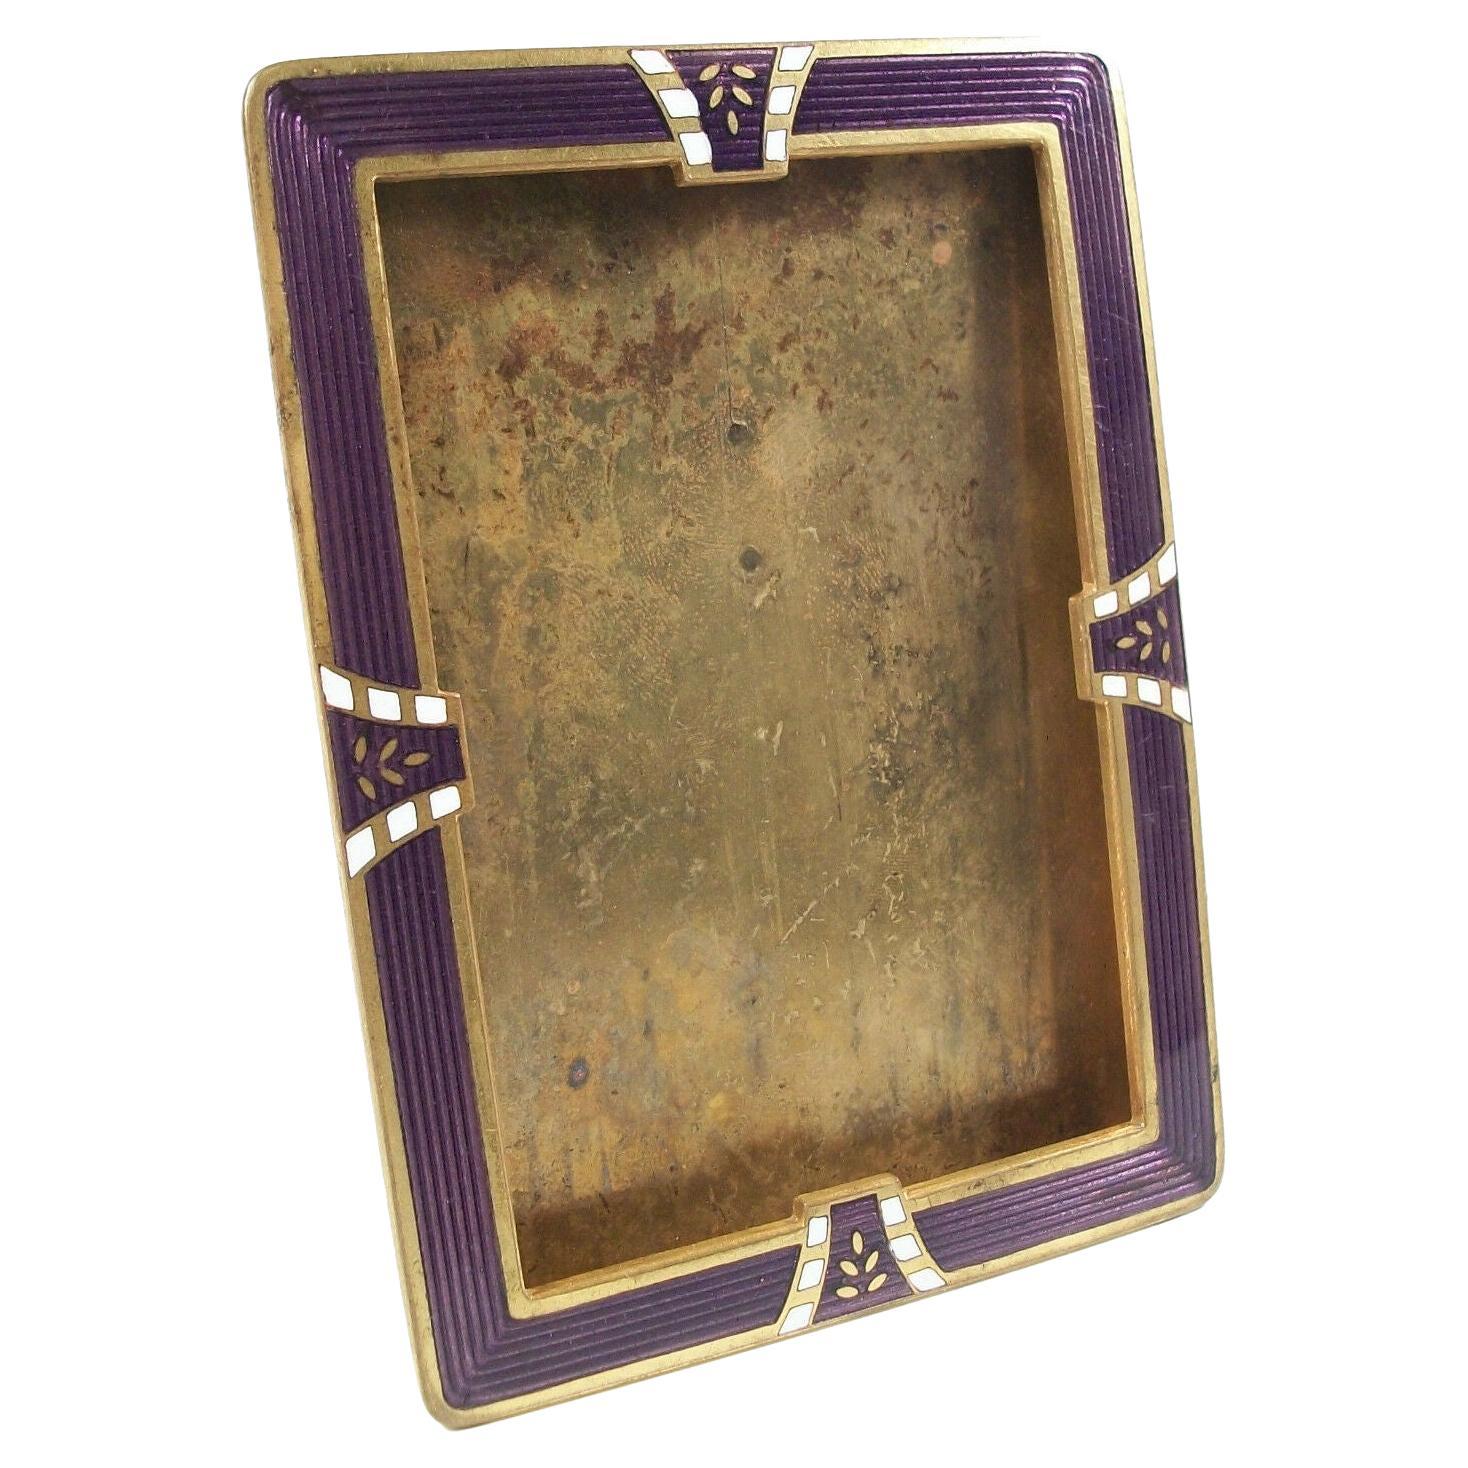 Art Deco Enamel & Gilt Brass Picture Frame, Continental, Early 20th Century For Sale